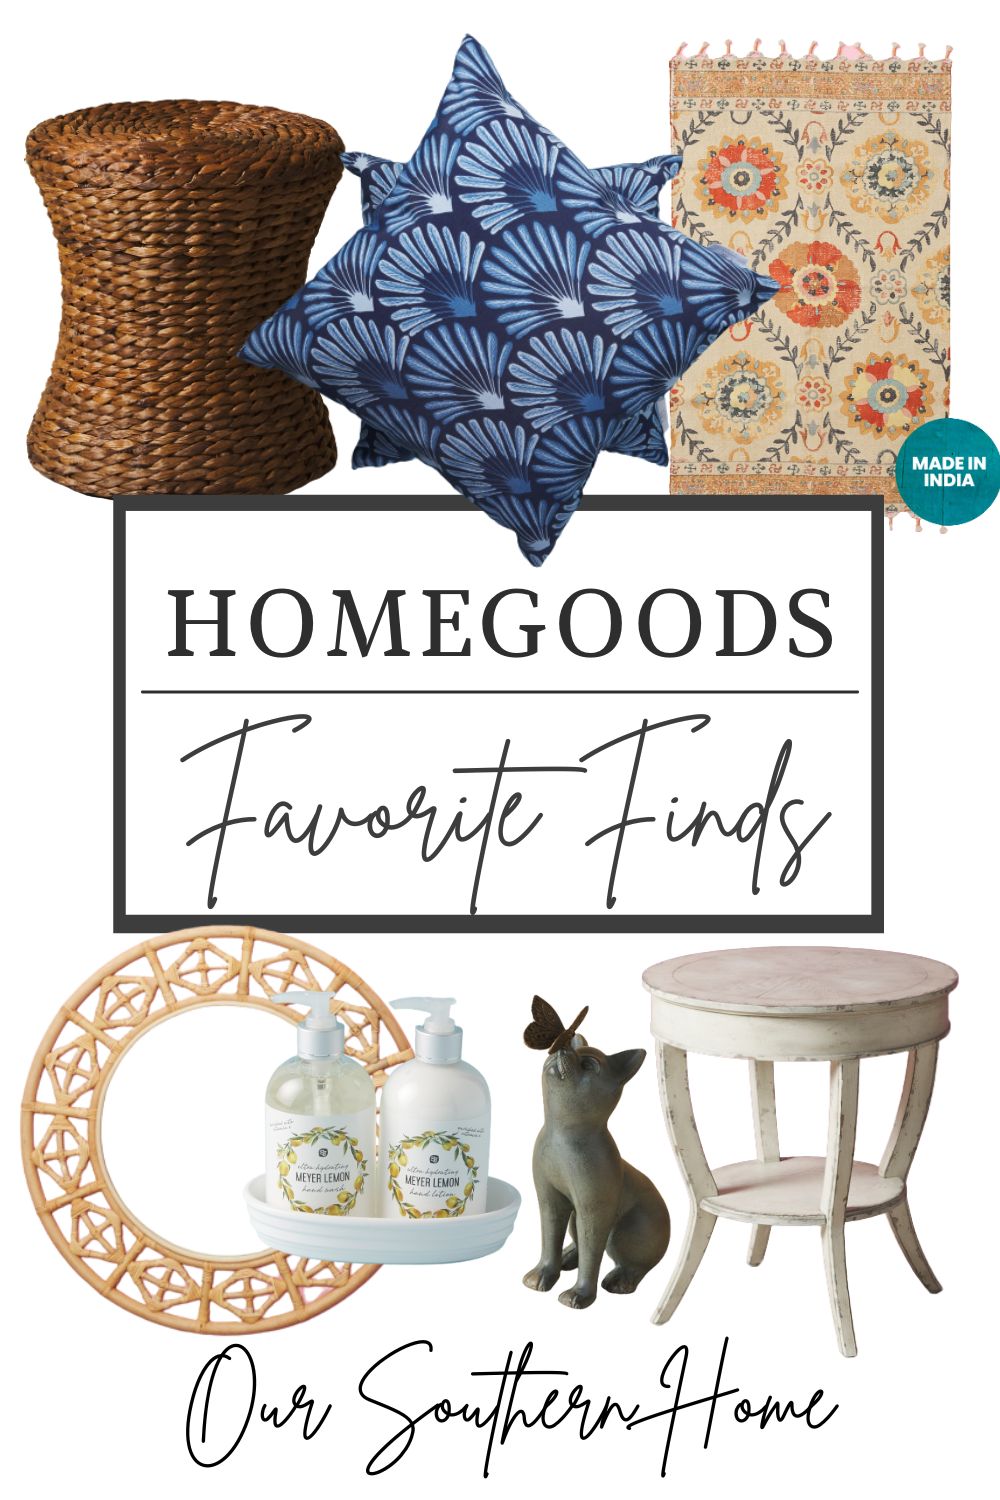 MUST HAVE*  HOME FINDS 2023   finds you need for your